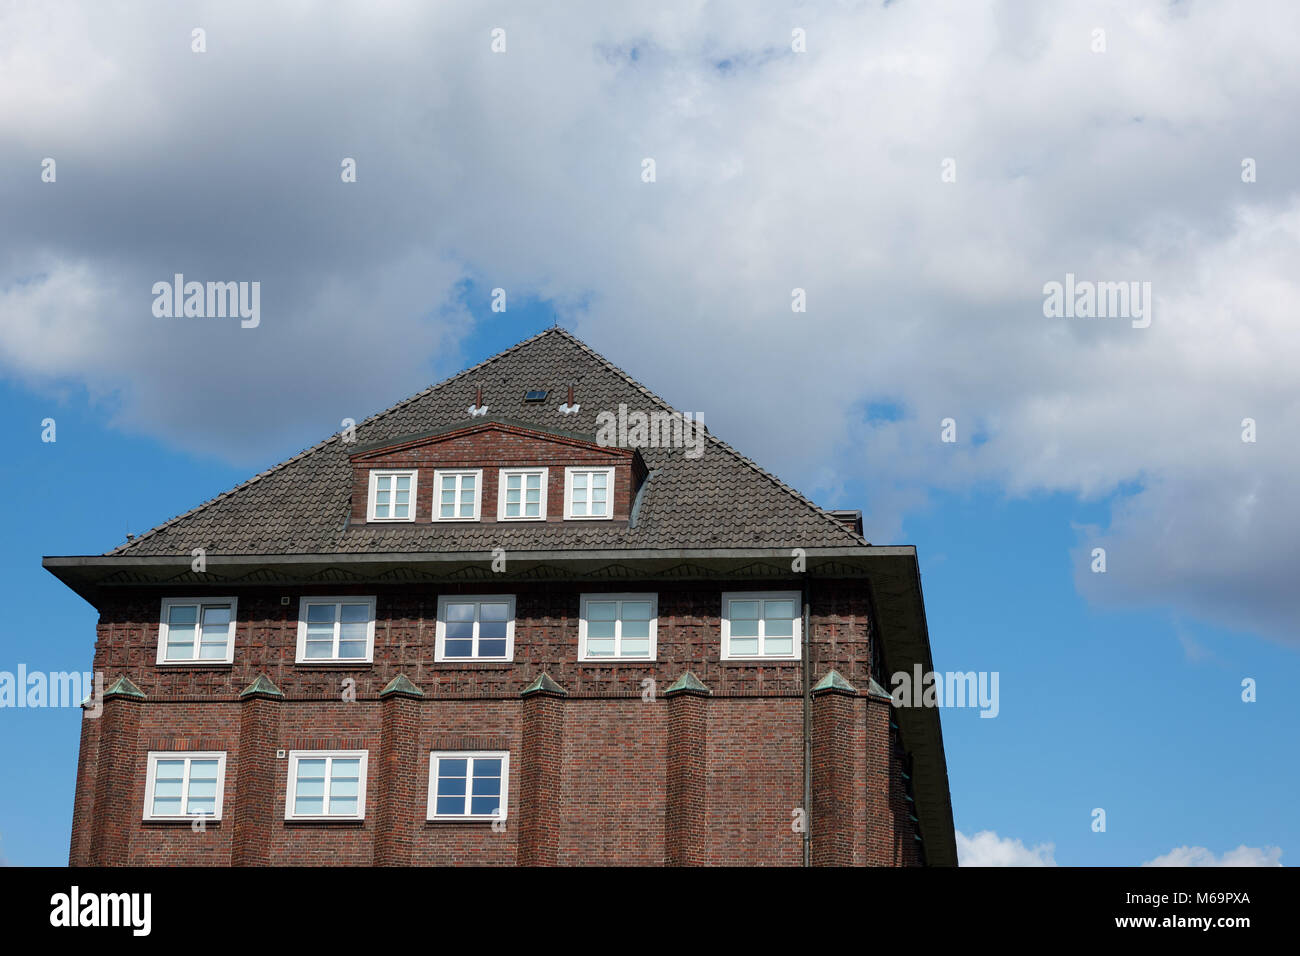 Roof of an old red brick house against a blue sky and clouds in Hamburg. Stock Photo